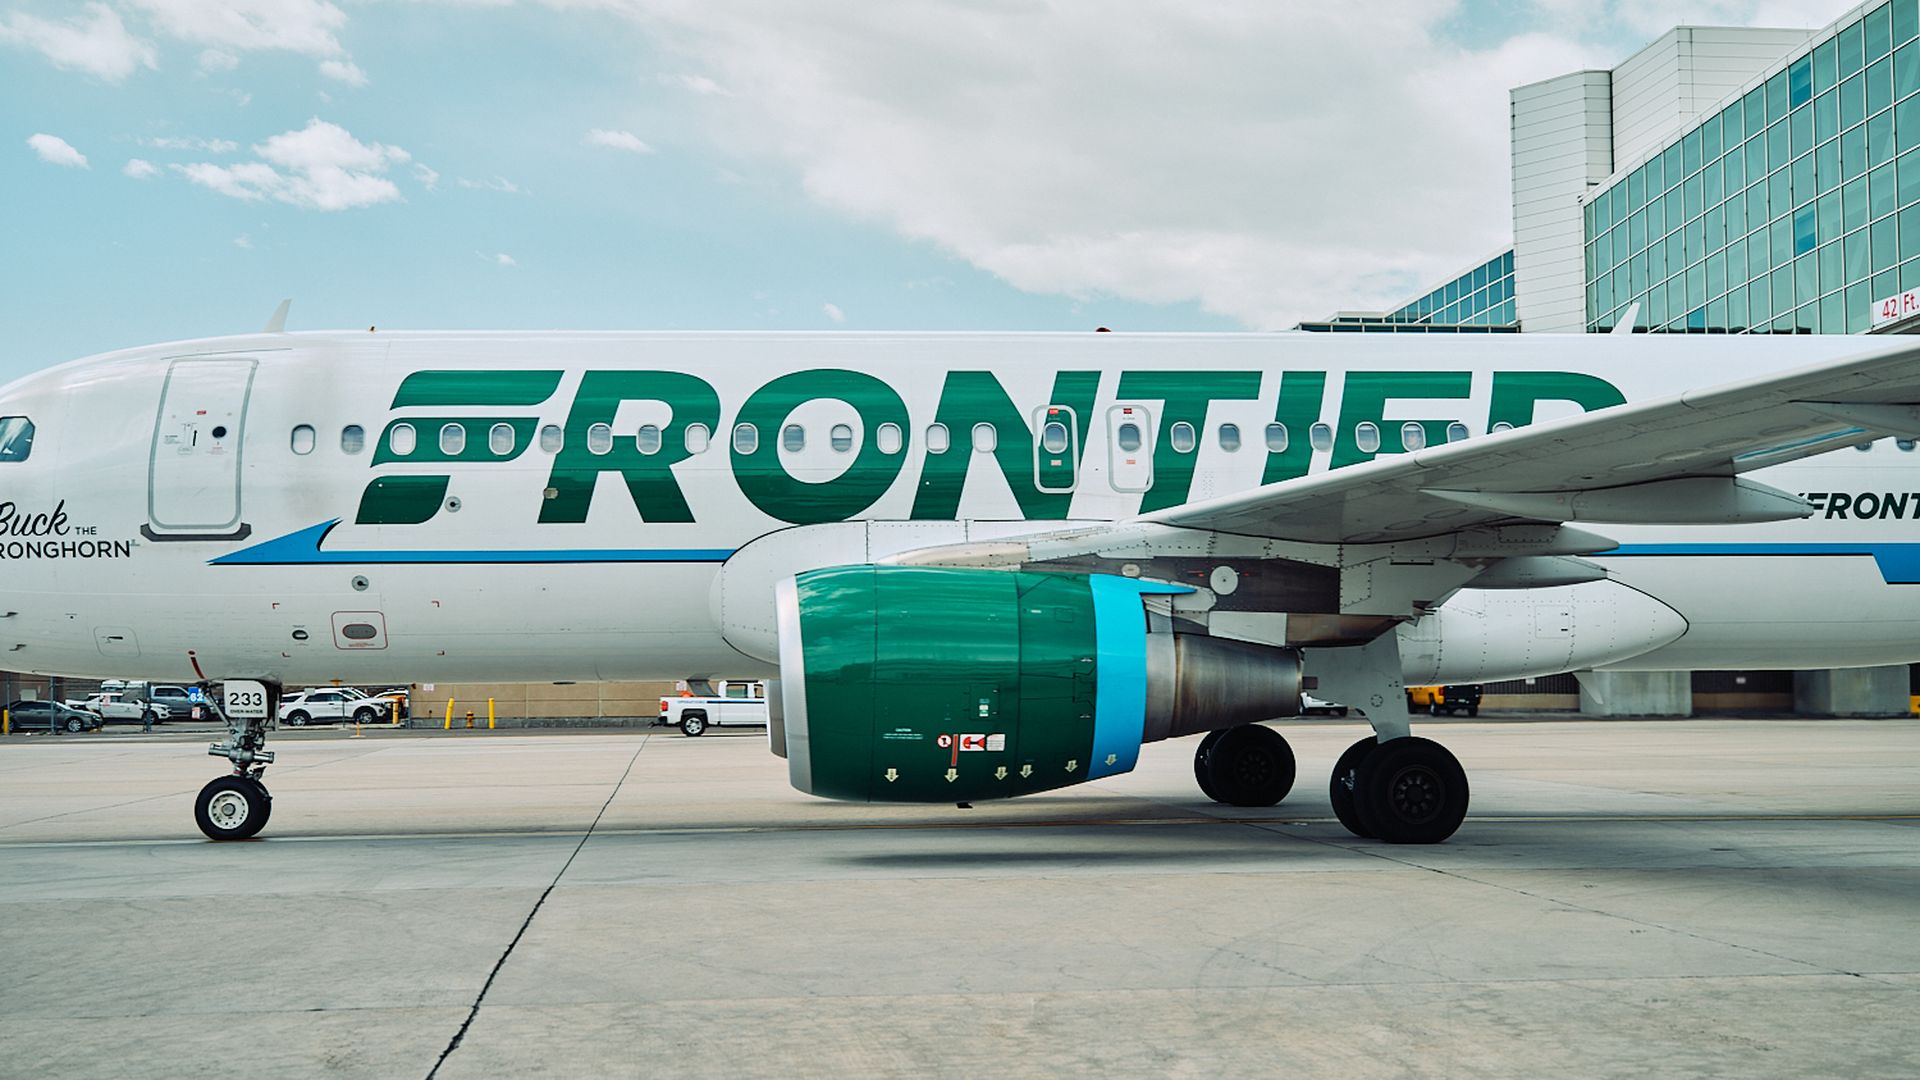 A Frontier airplane in profile on a tarmac.